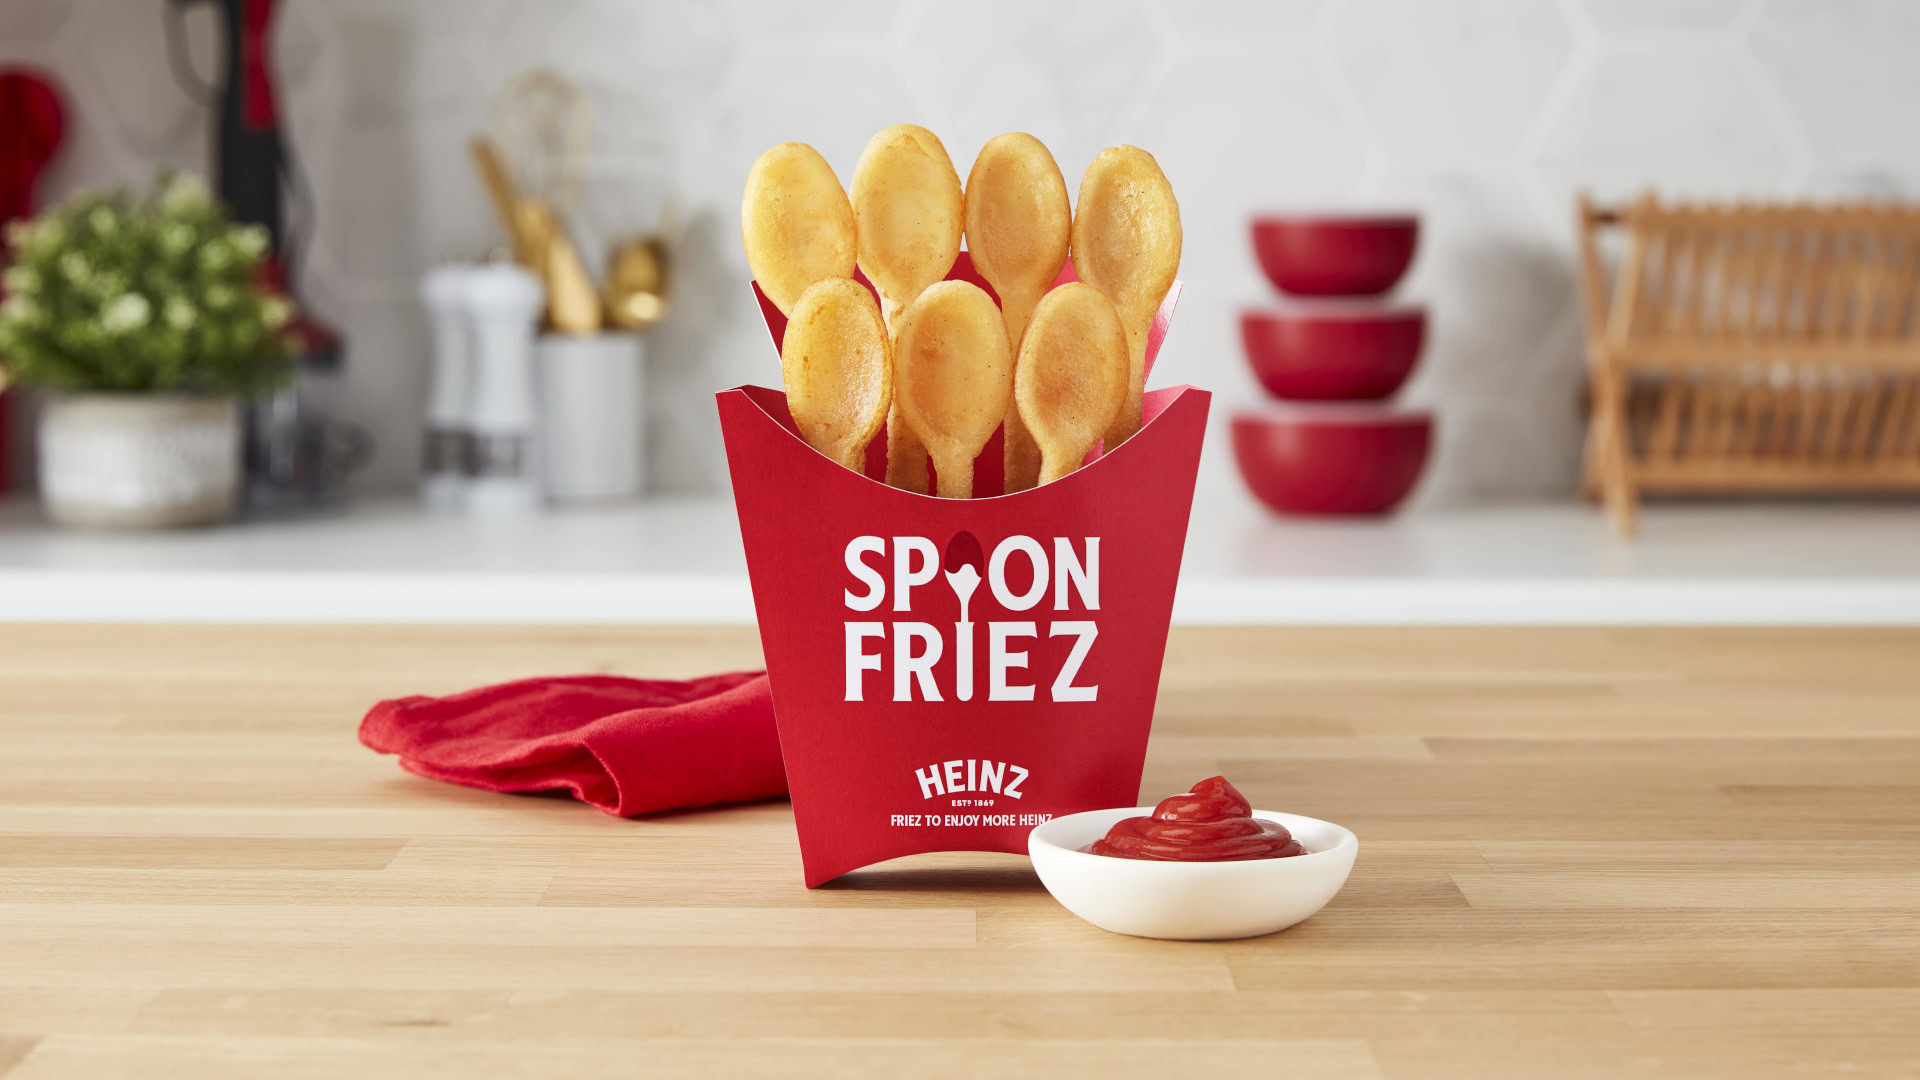 Heinz Spoon Fries have been resized